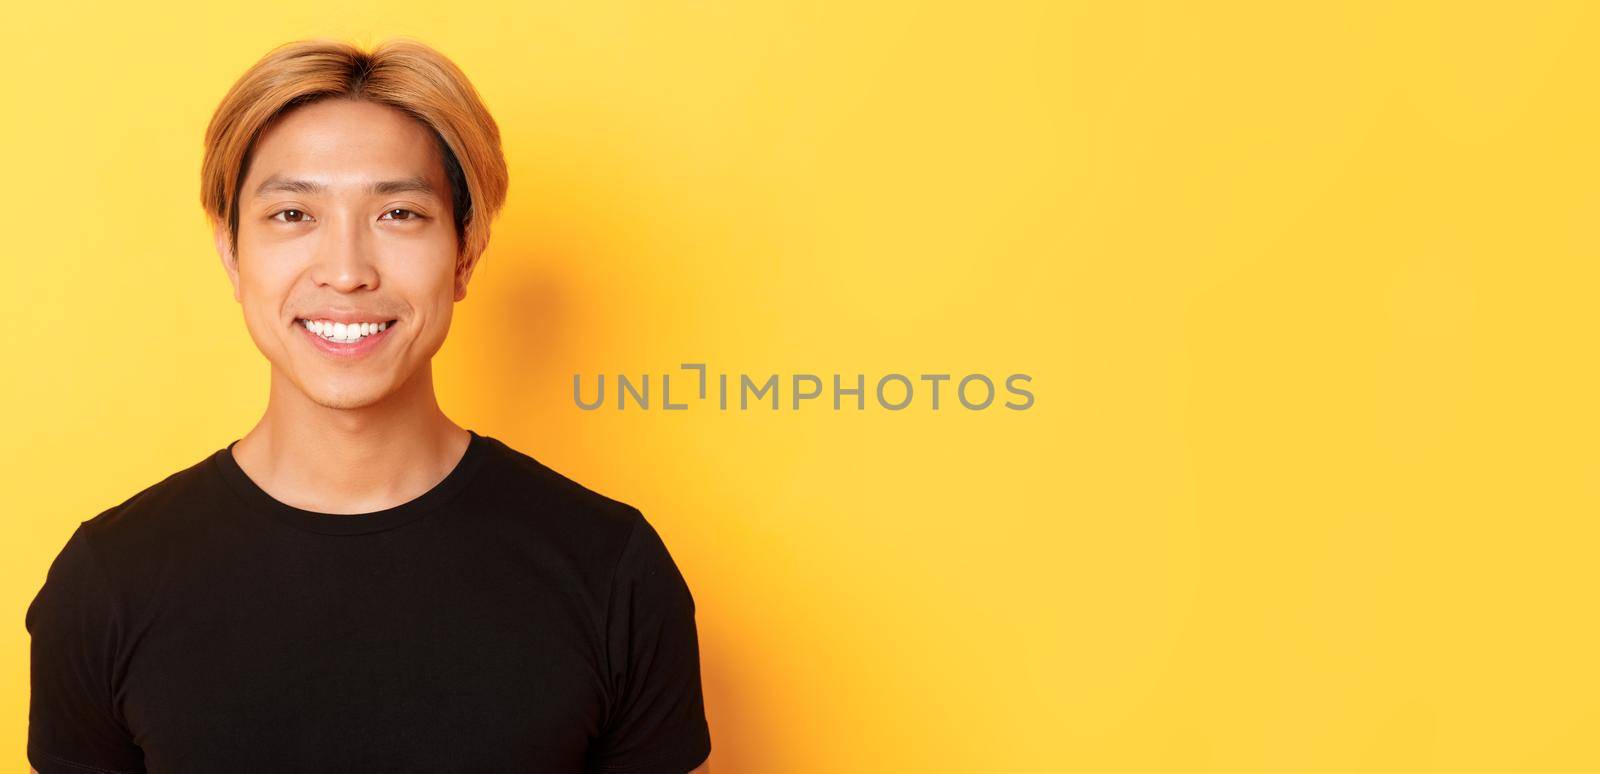 Close-up of handsome blond asian guy in black t-shirt, smiling happy at camera, standing over yellow background.